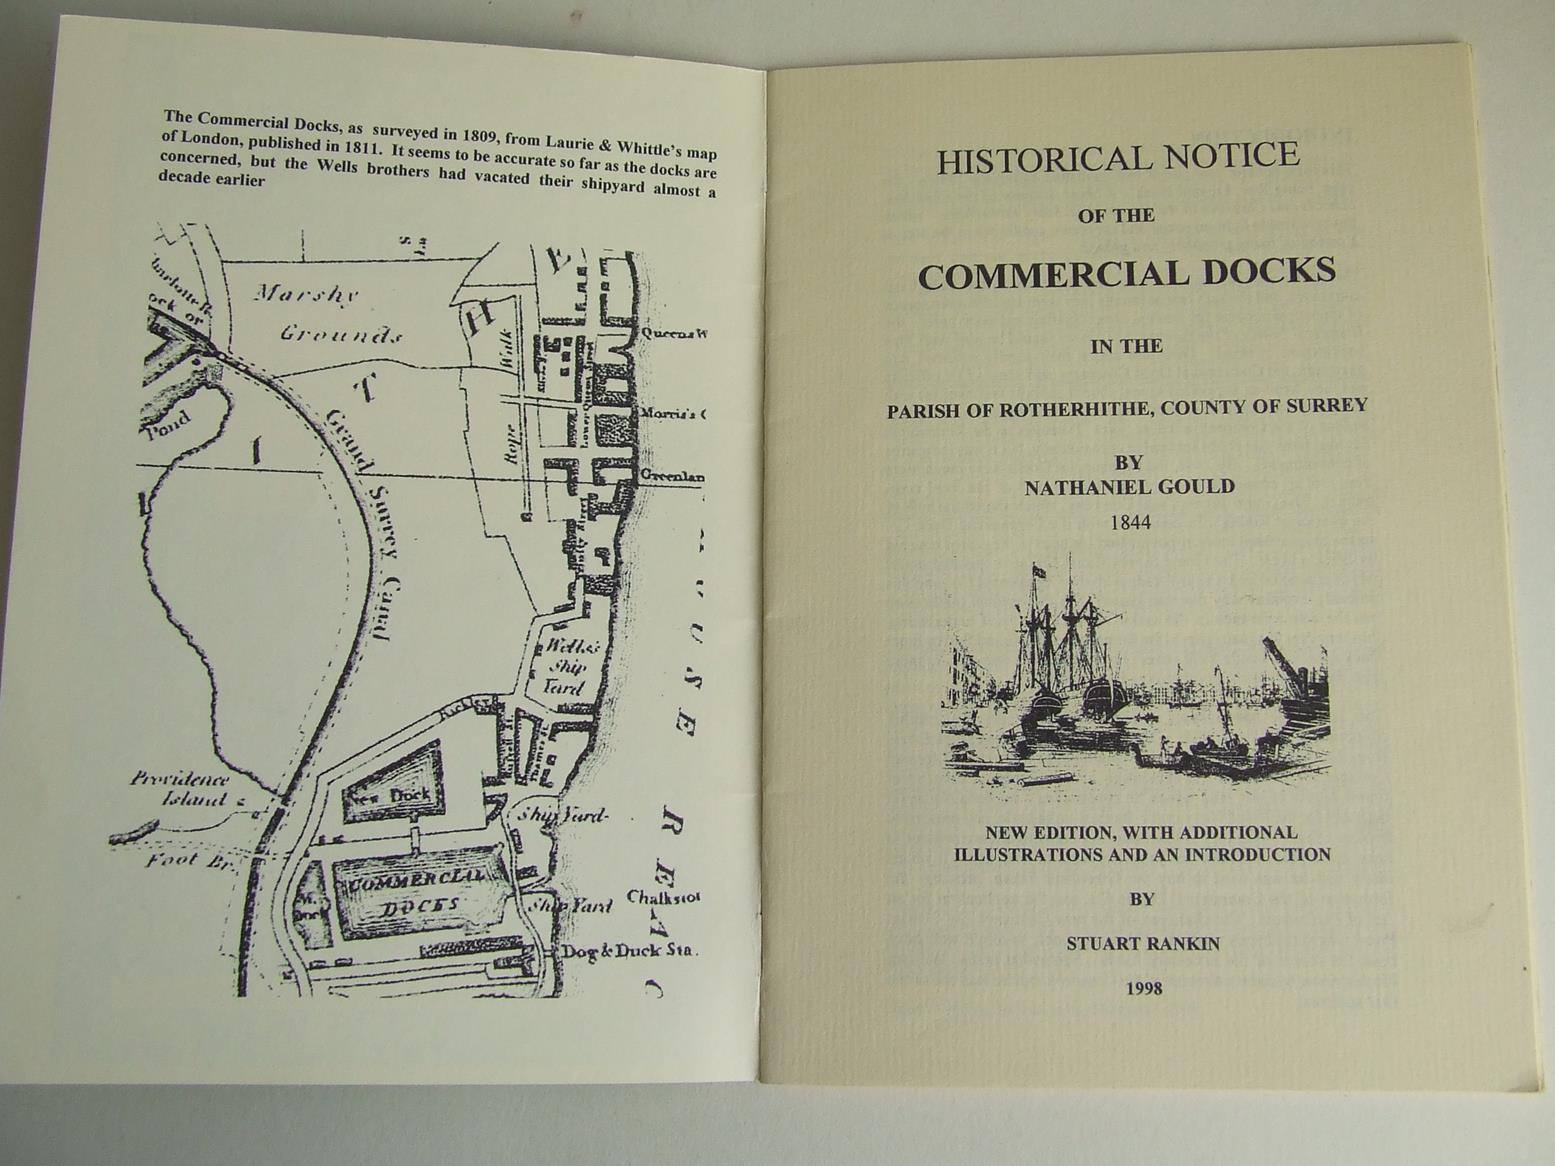 Historical Notice of the Commercial Docks in the Parish of Rotherhithe, County of Surrey [1844]